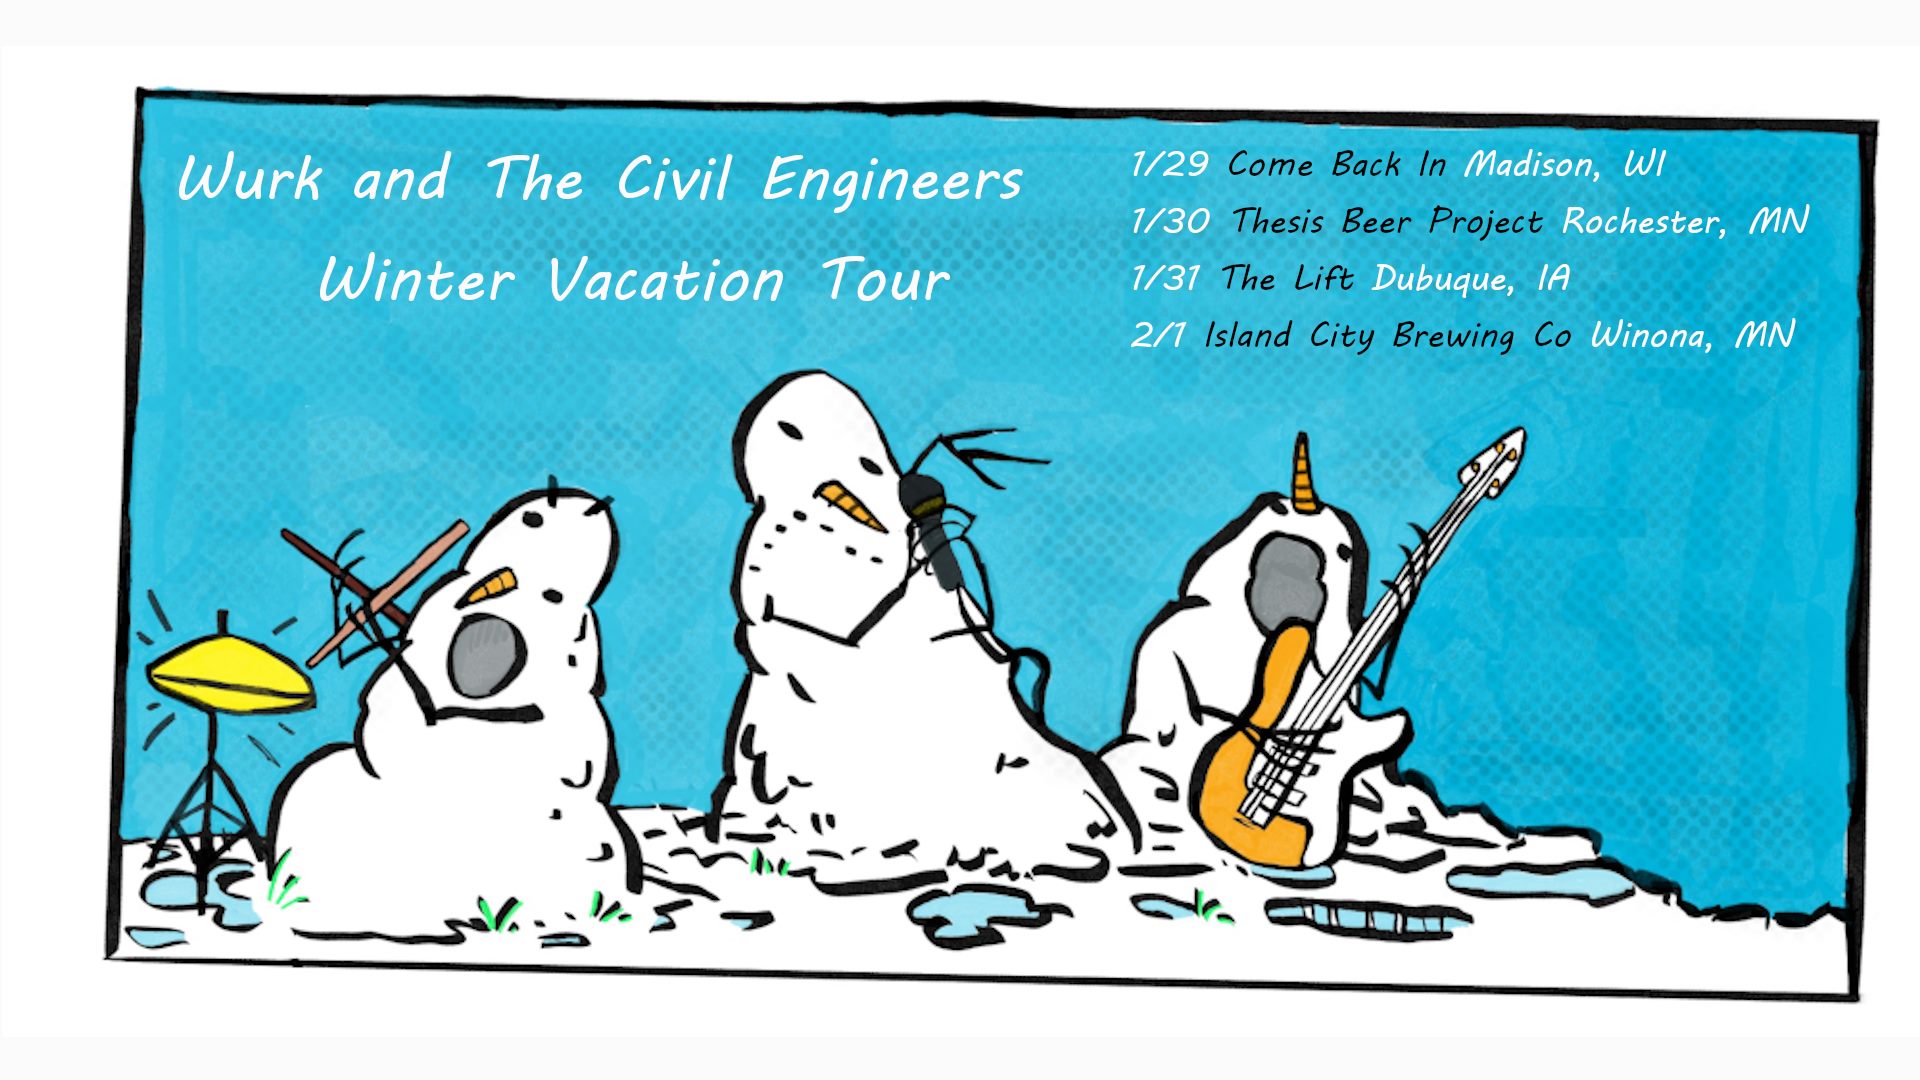 Wurk and The Civil Engineers Winter Vacation Tour